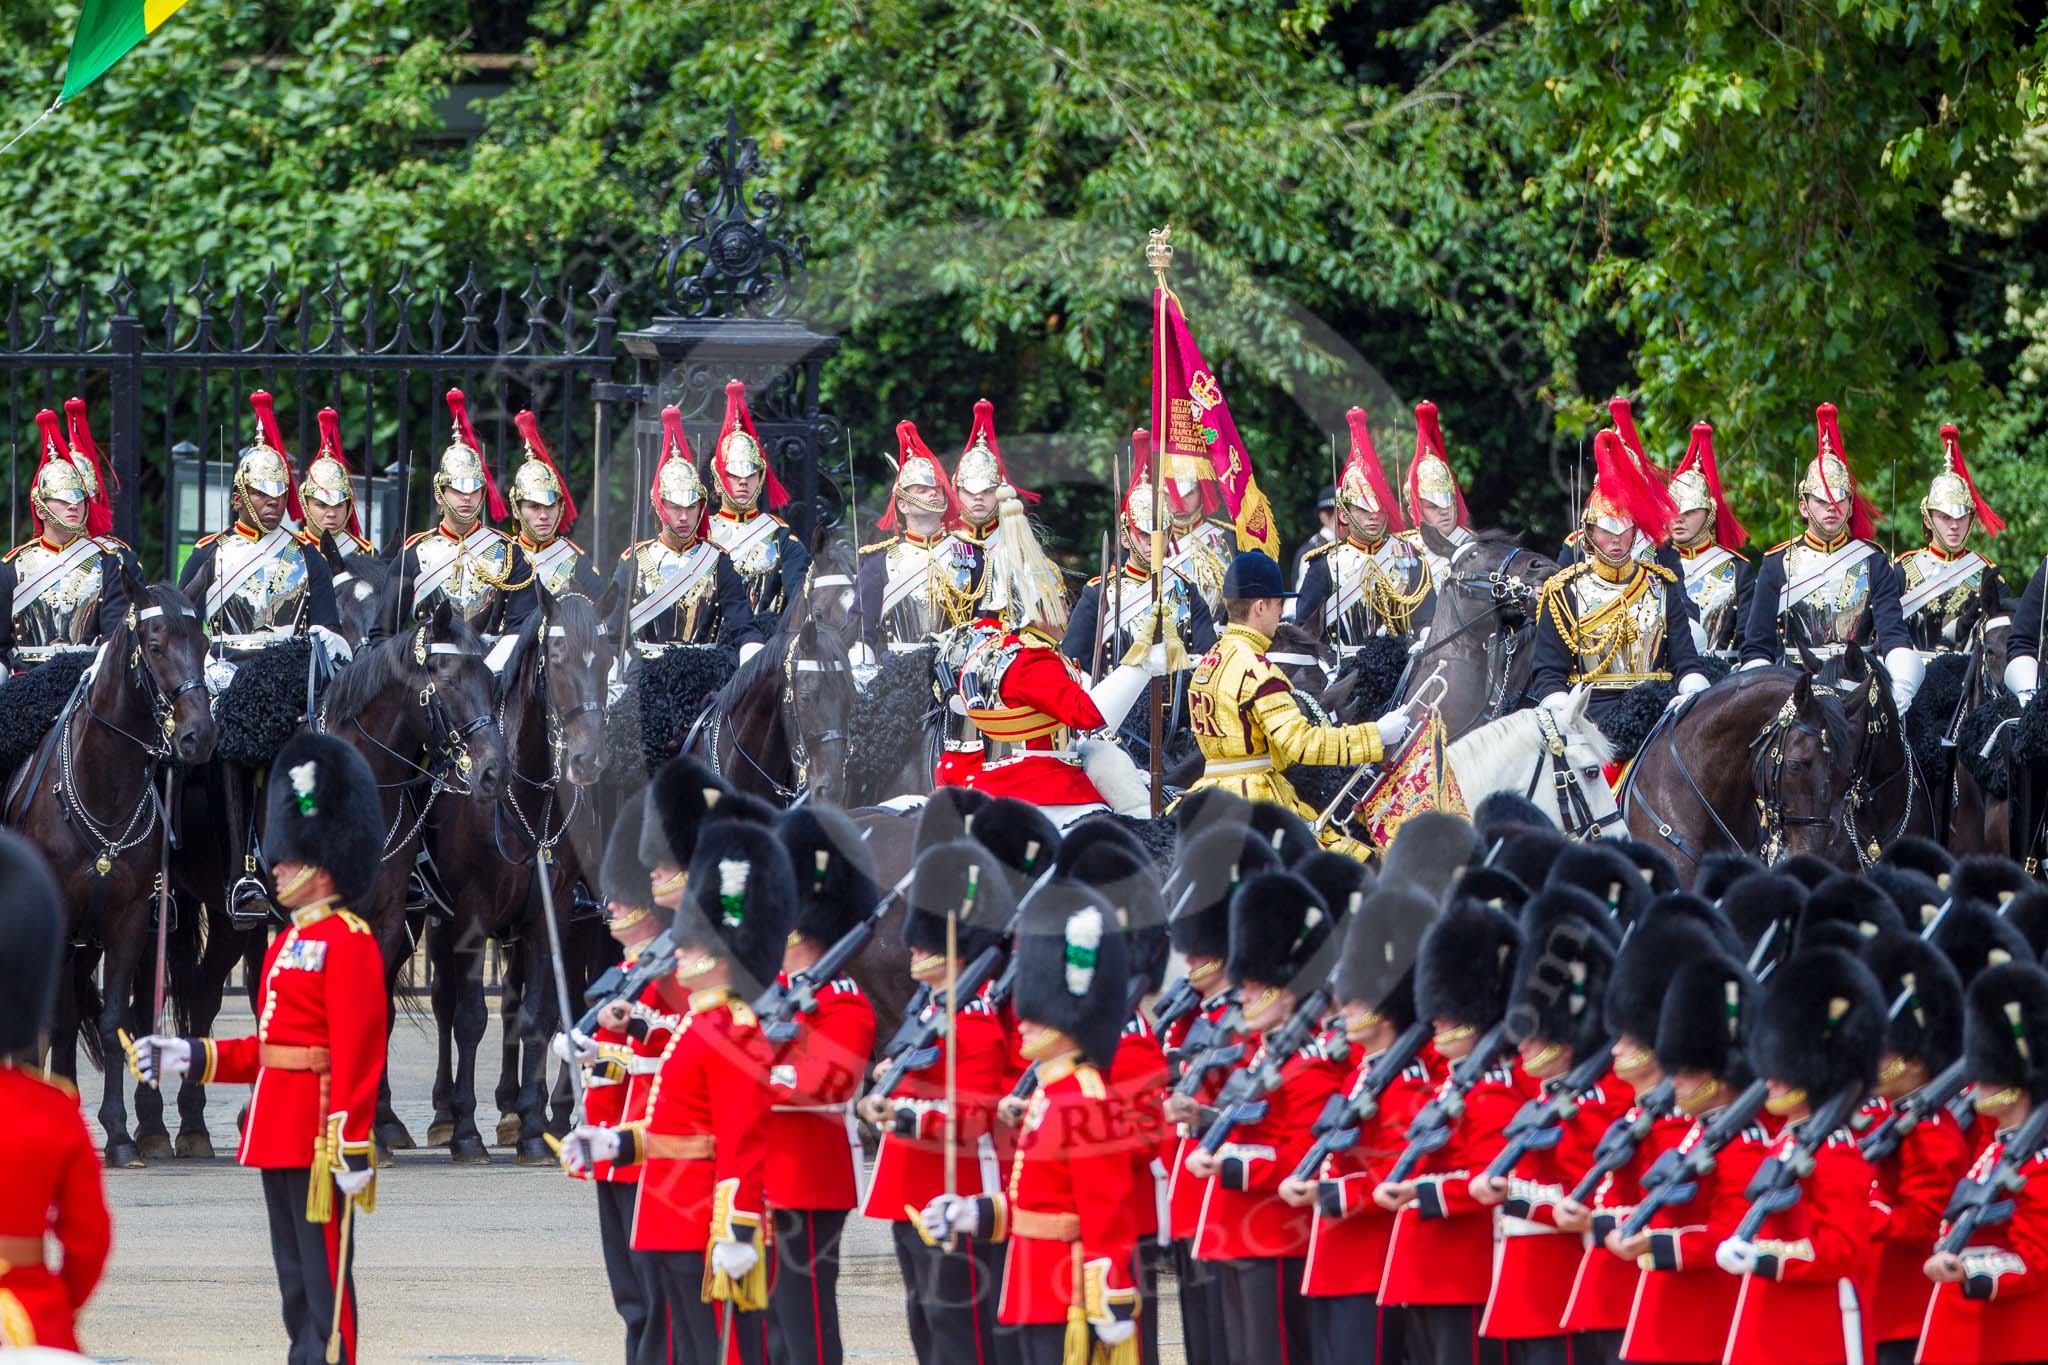 The Colonel's Review 2015.
Horse Guards Parade, Westminster,
London,

United Kingdom,
on 06 June 2015 at 12:02, image #564